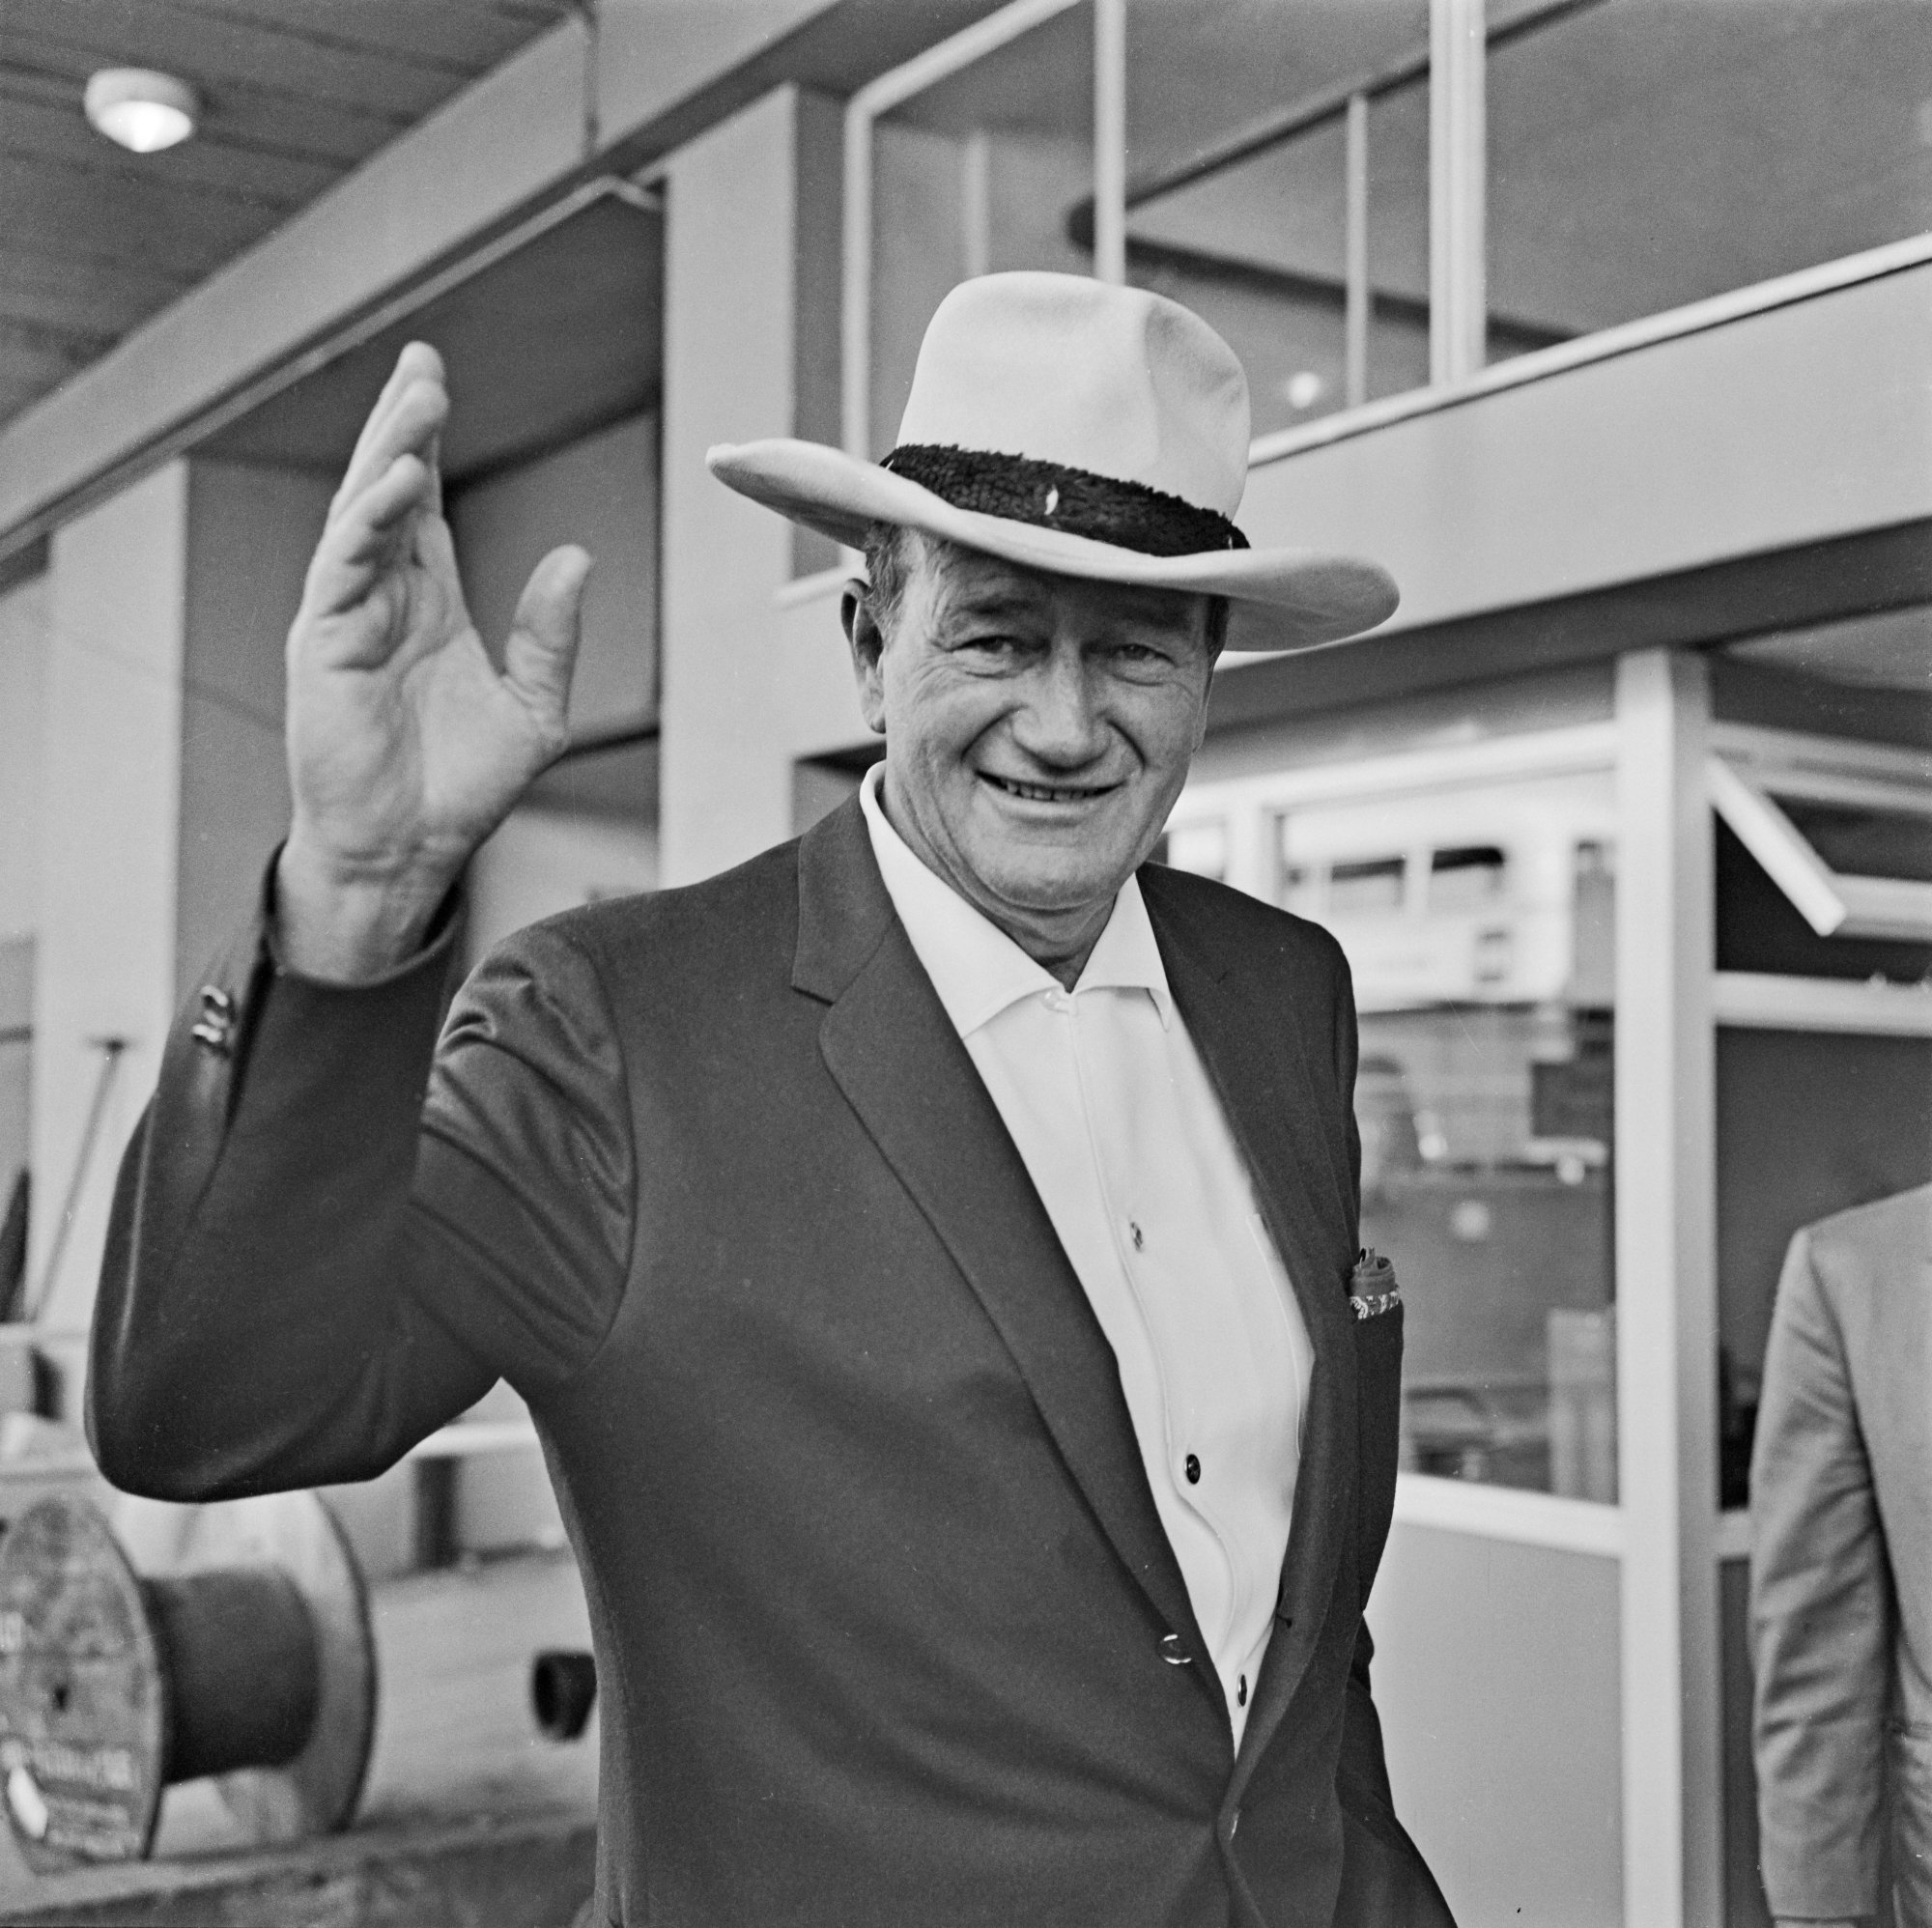 John Wayne holding a hand up waving wearing a suit and hat